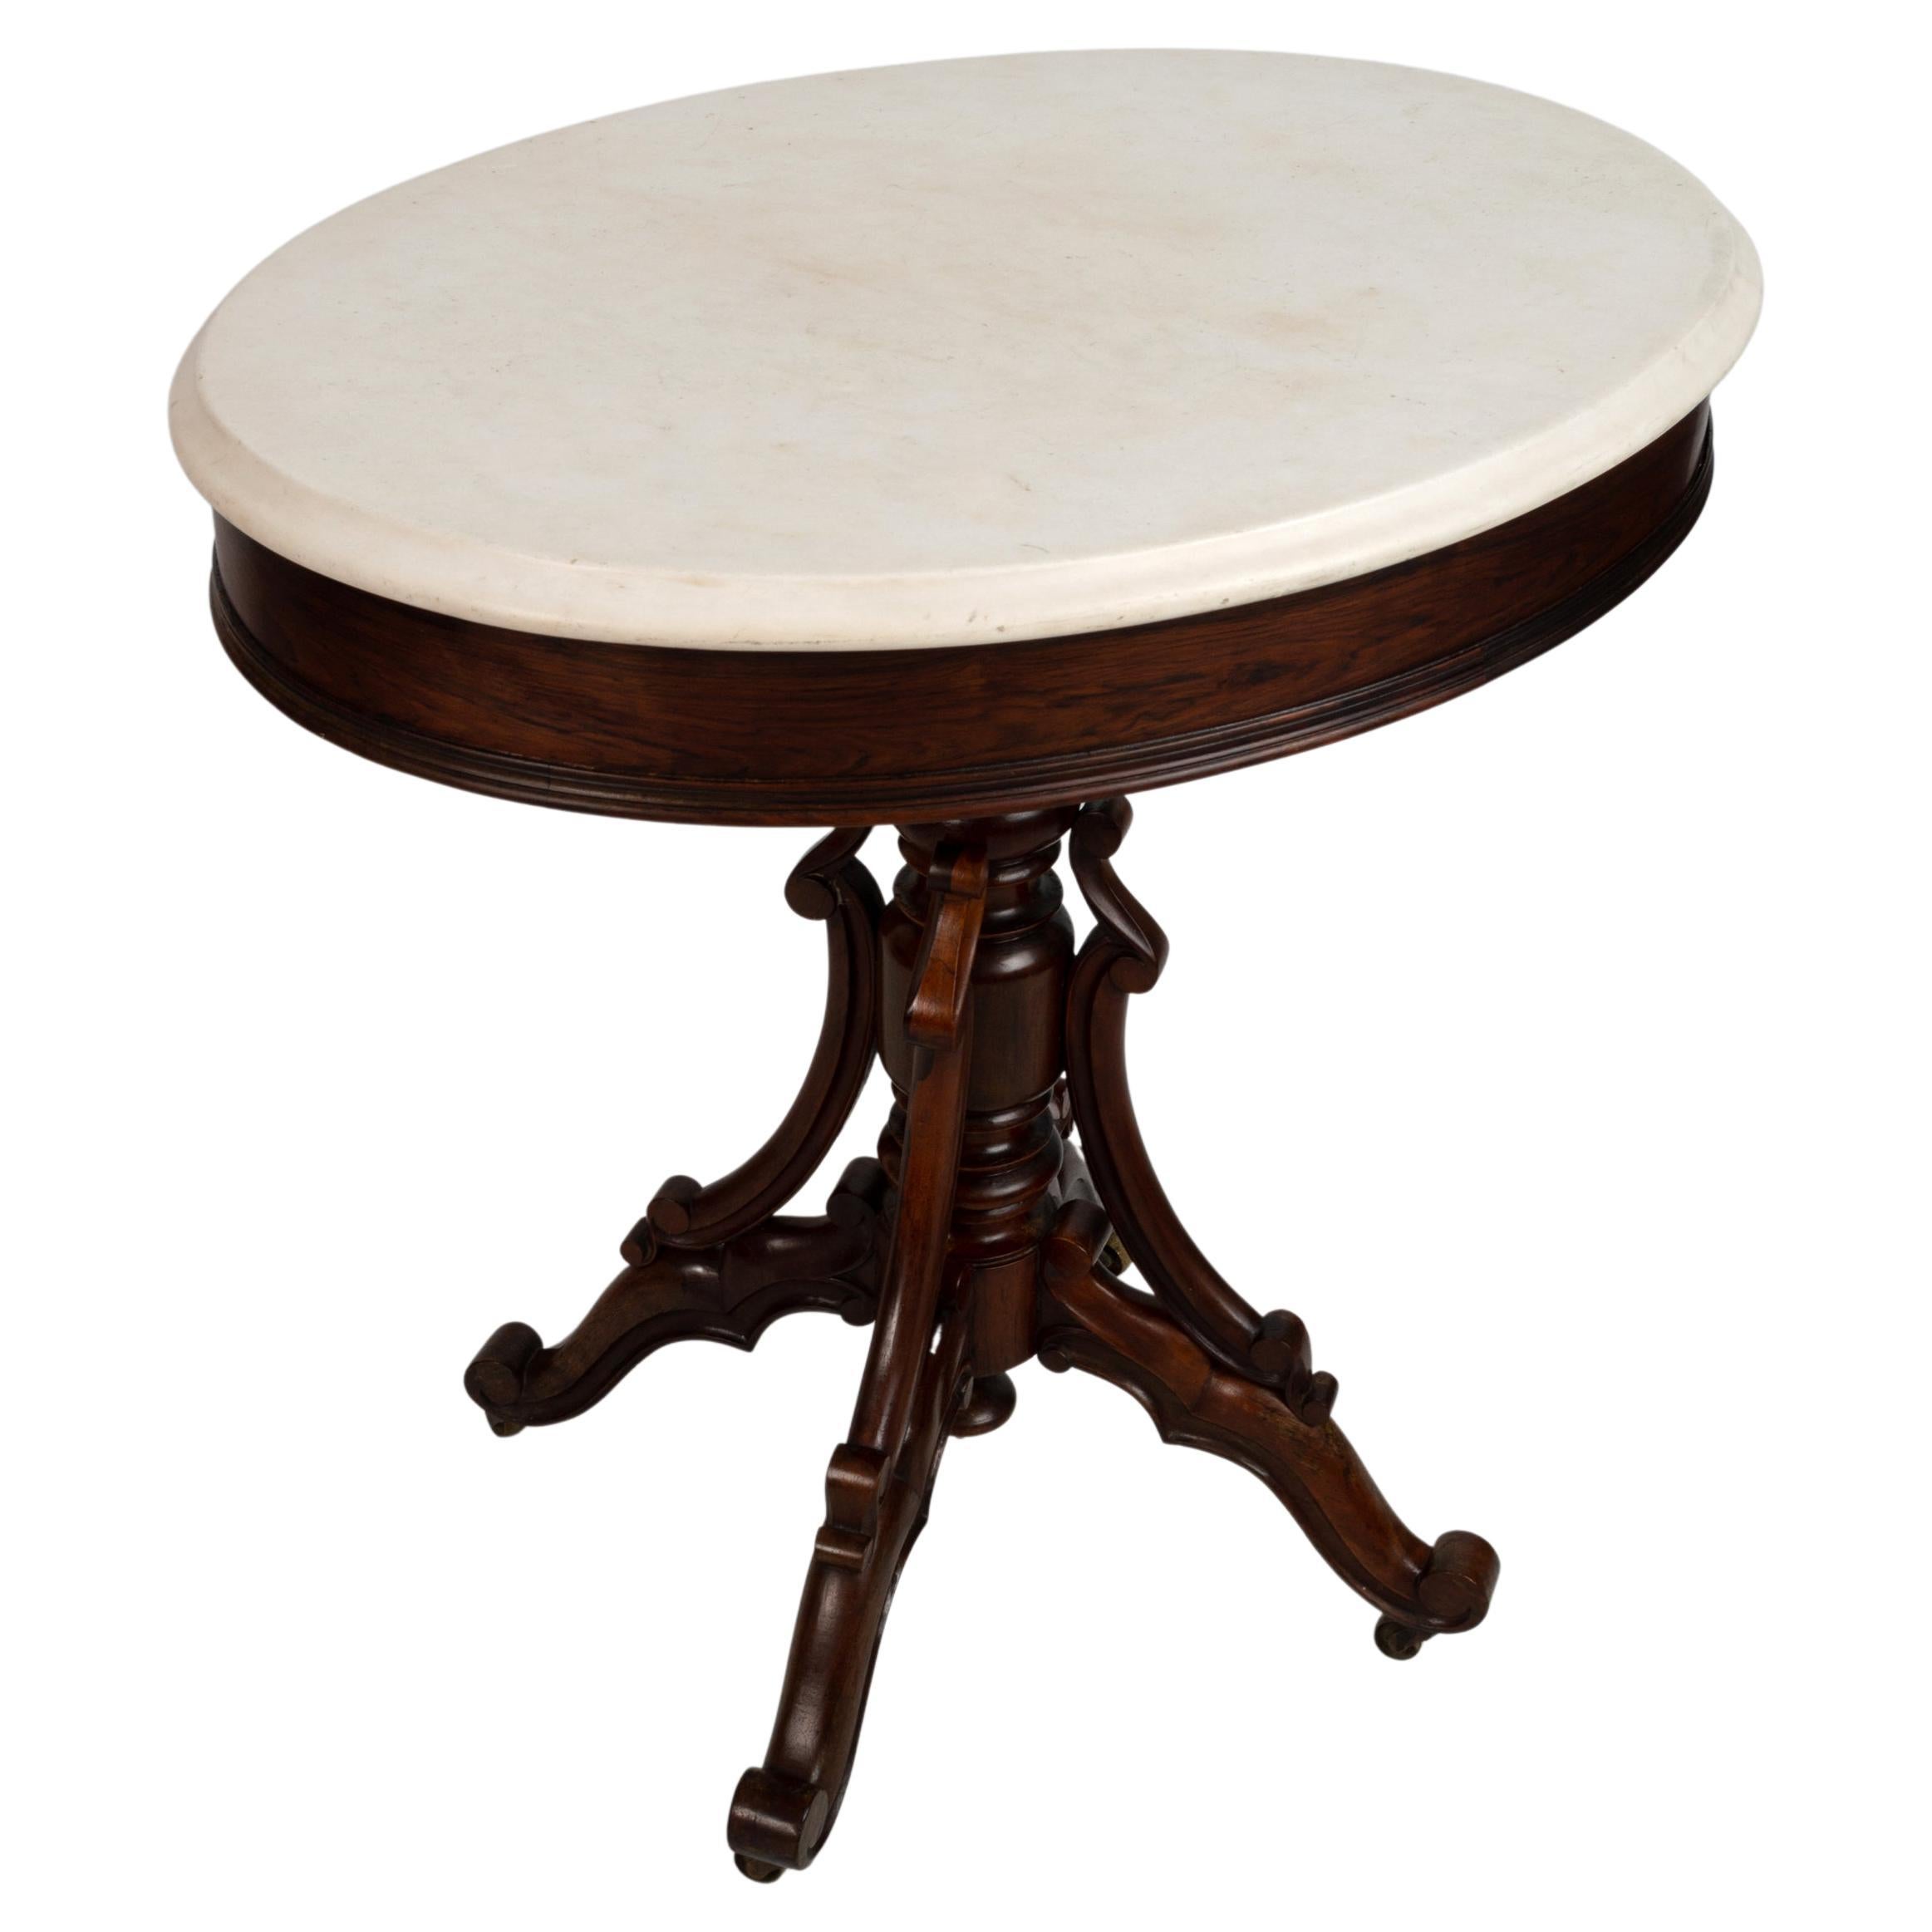 A French rosewood oval occasional table, 19th century, the white marble top with a moulded edge, over a turned stem, on four scrolling legs, joined by scrolling brackets, terminating in brass castors.

74cm high x 73cm wide x 53cm deep.

In